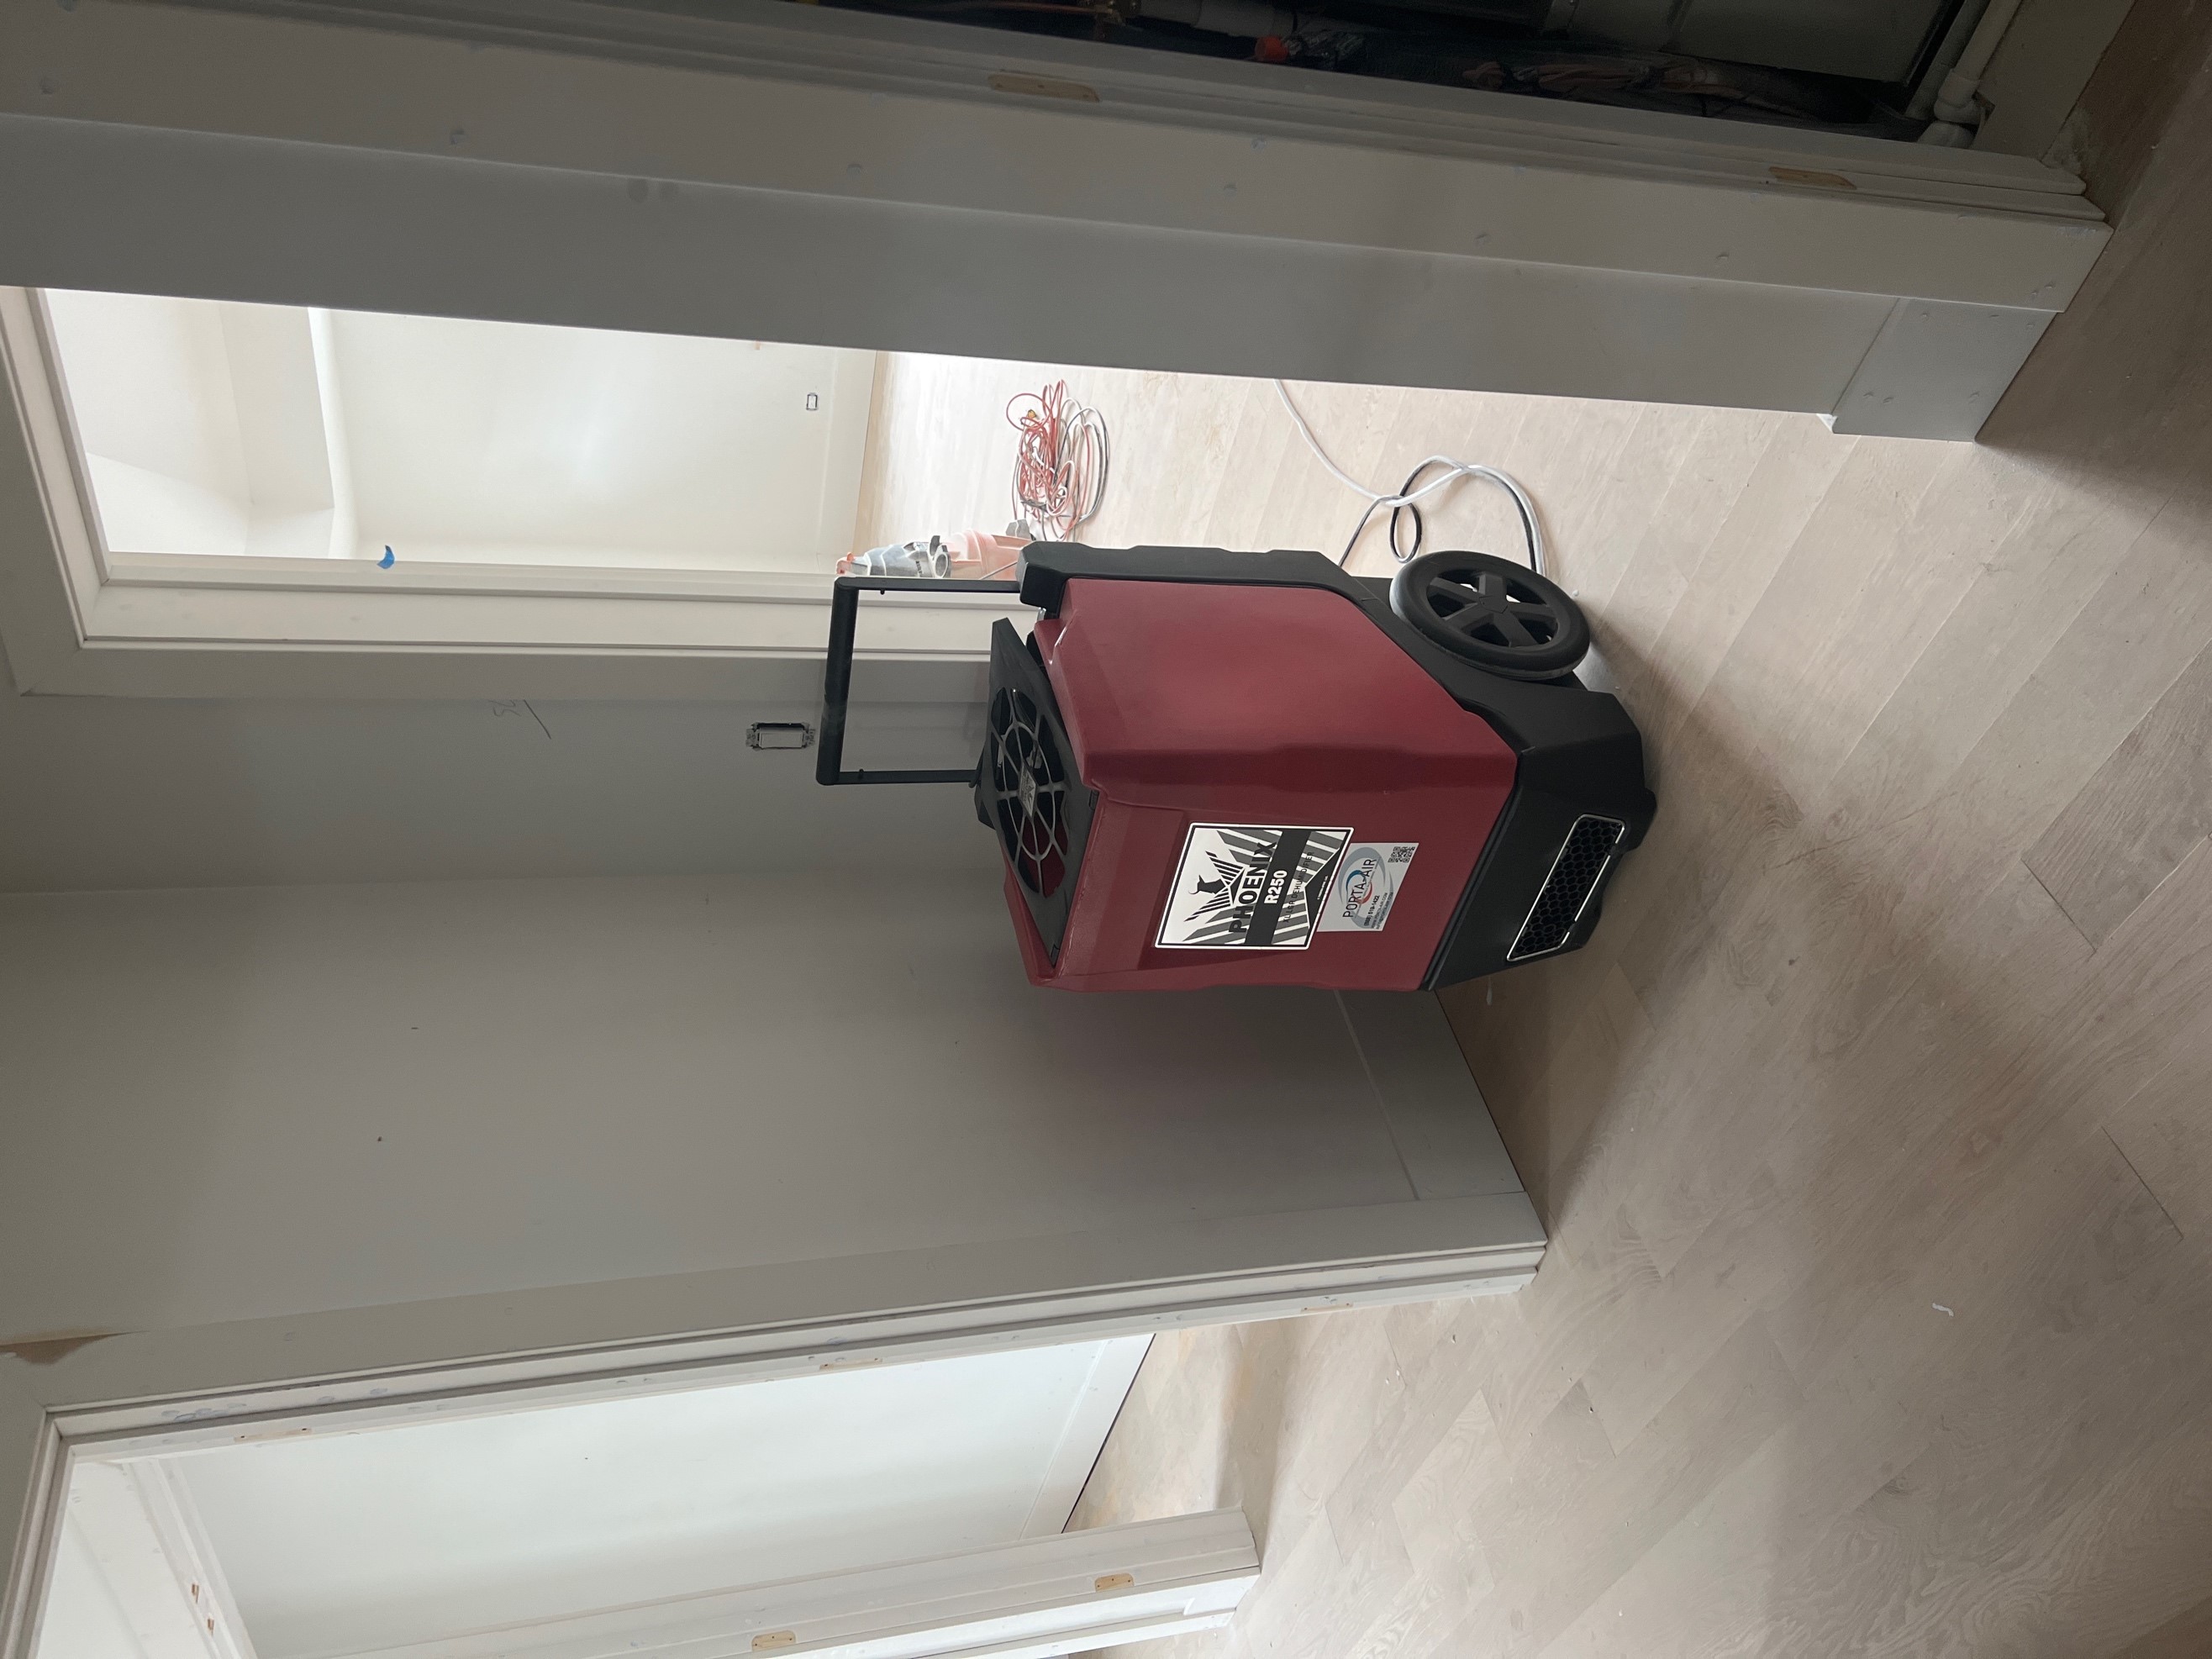 Red portable dehumidifier plugged into the wall outlet inside a new home under construction. 